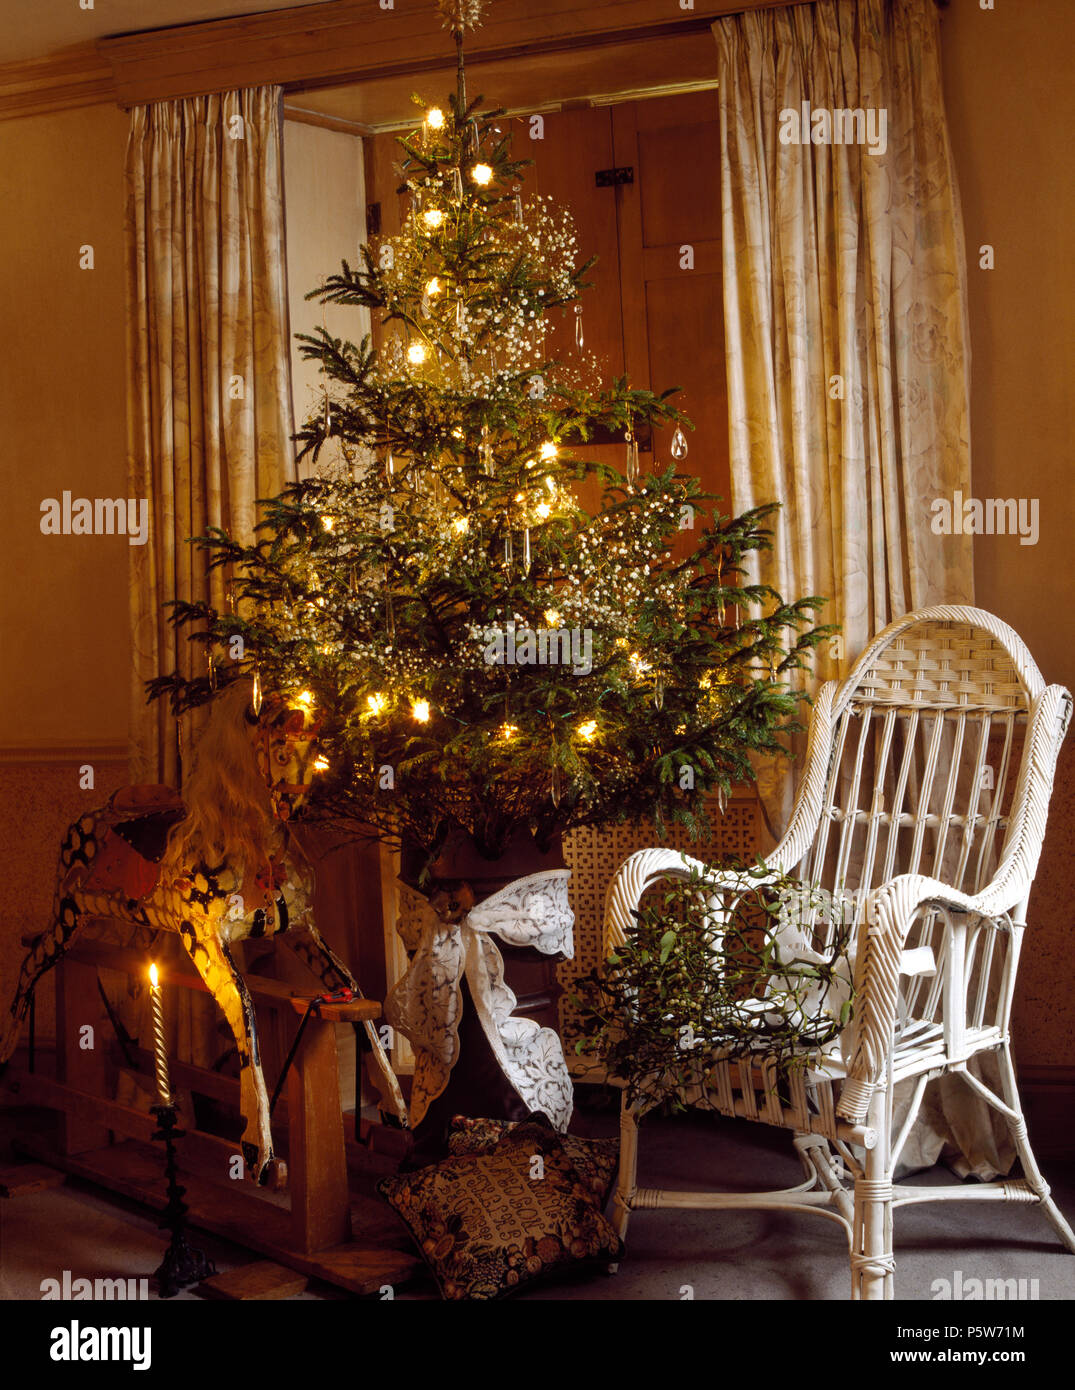 Rocking horse and white wicker chair either side of Christmas tree with simple decorations and lighting Stock Photo